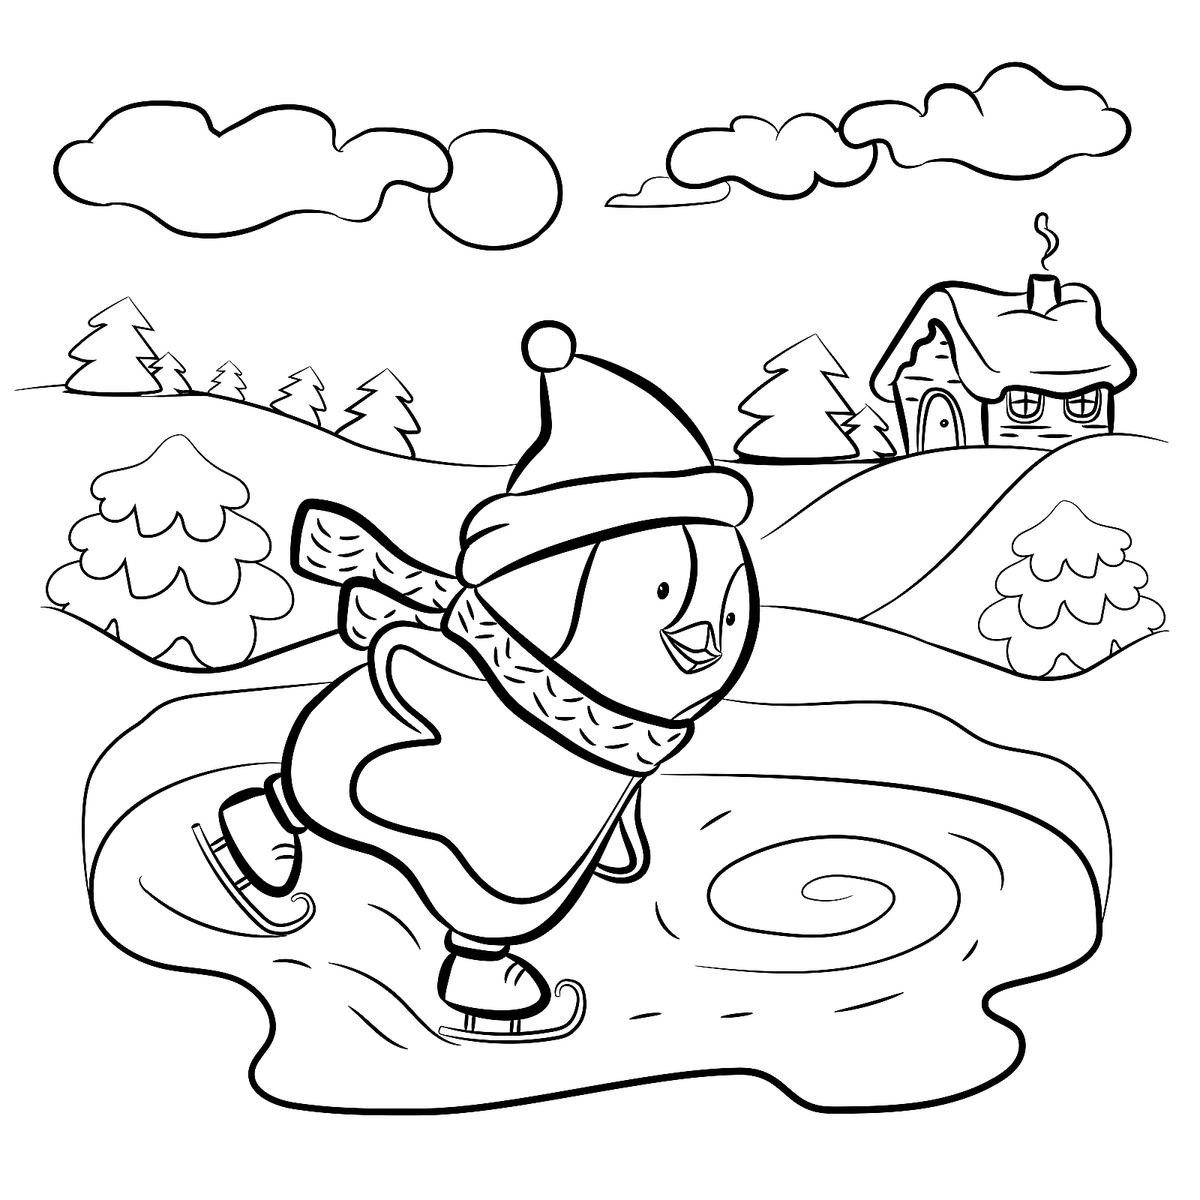 Winter Coloring Pages For Kids
 Winter Puzzle & Coloring Pages Printable Winter Themed